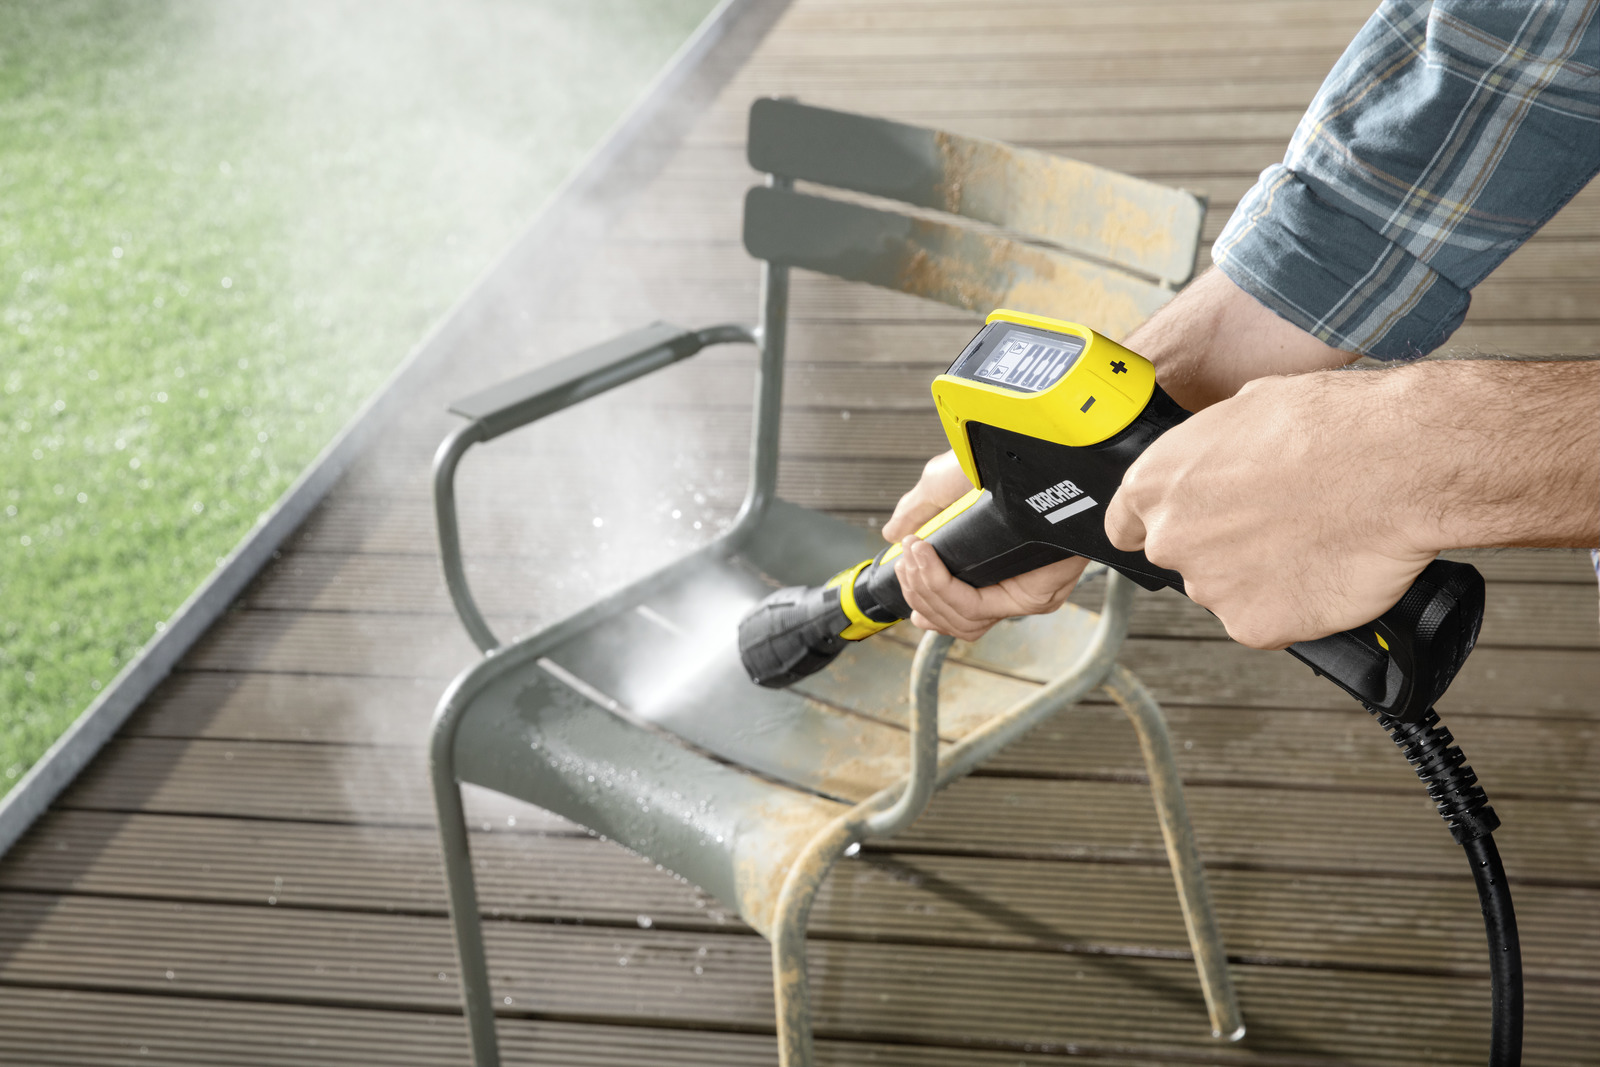 Karcher 2500 Max PSI 1.55 GPM K 5 Power Control CHK Cold Water